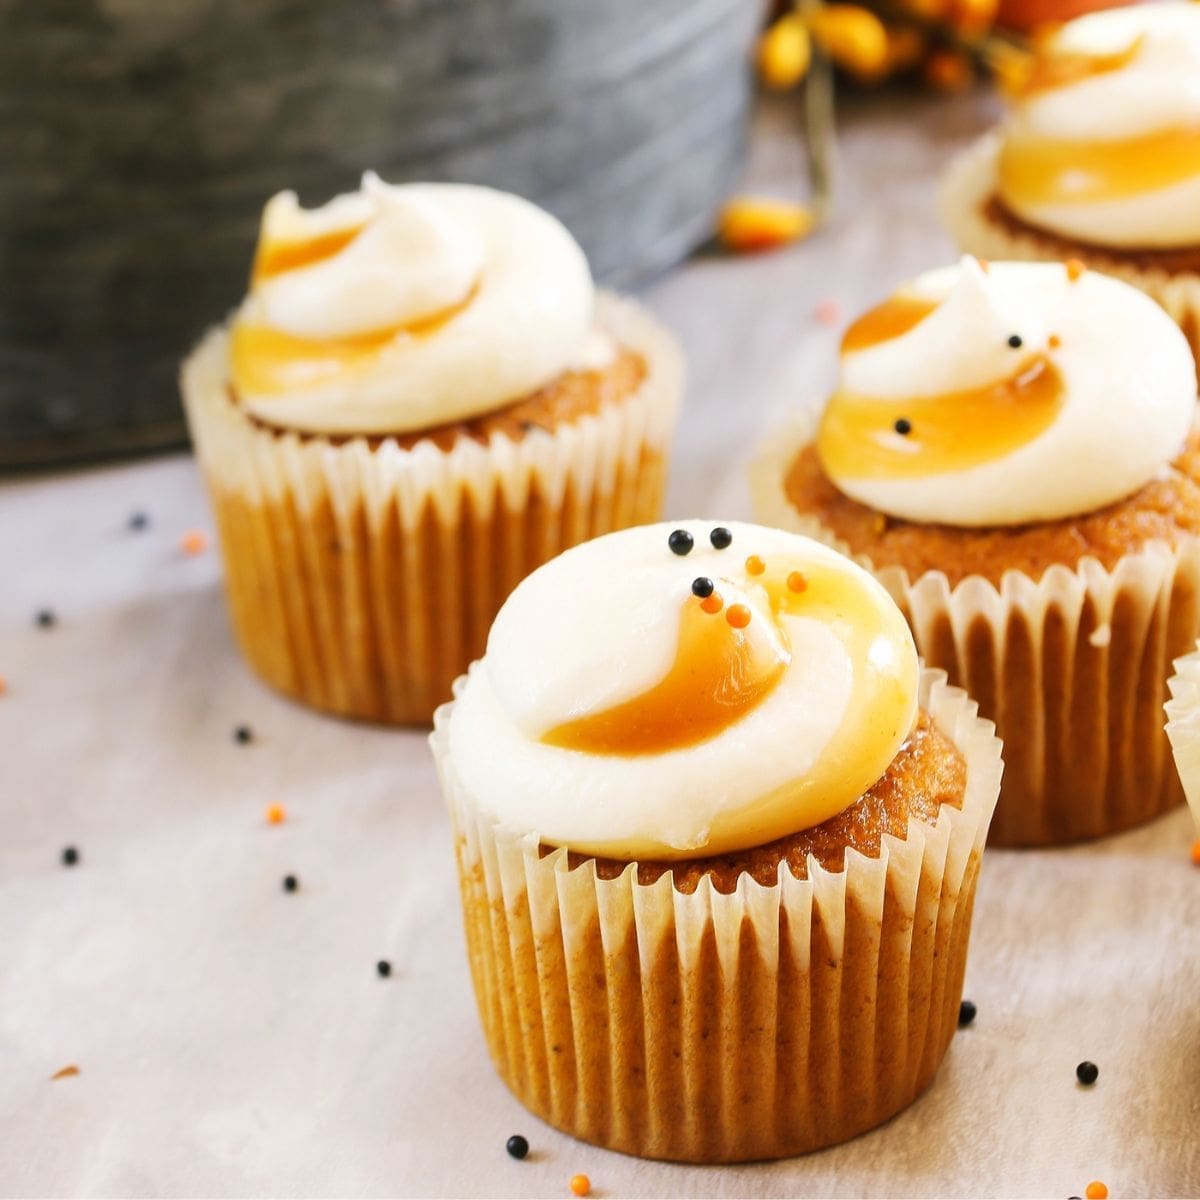 😍🧁 21 BEST Sugar Free Cupcakes Everyone Is Going To Love! 😍🧁